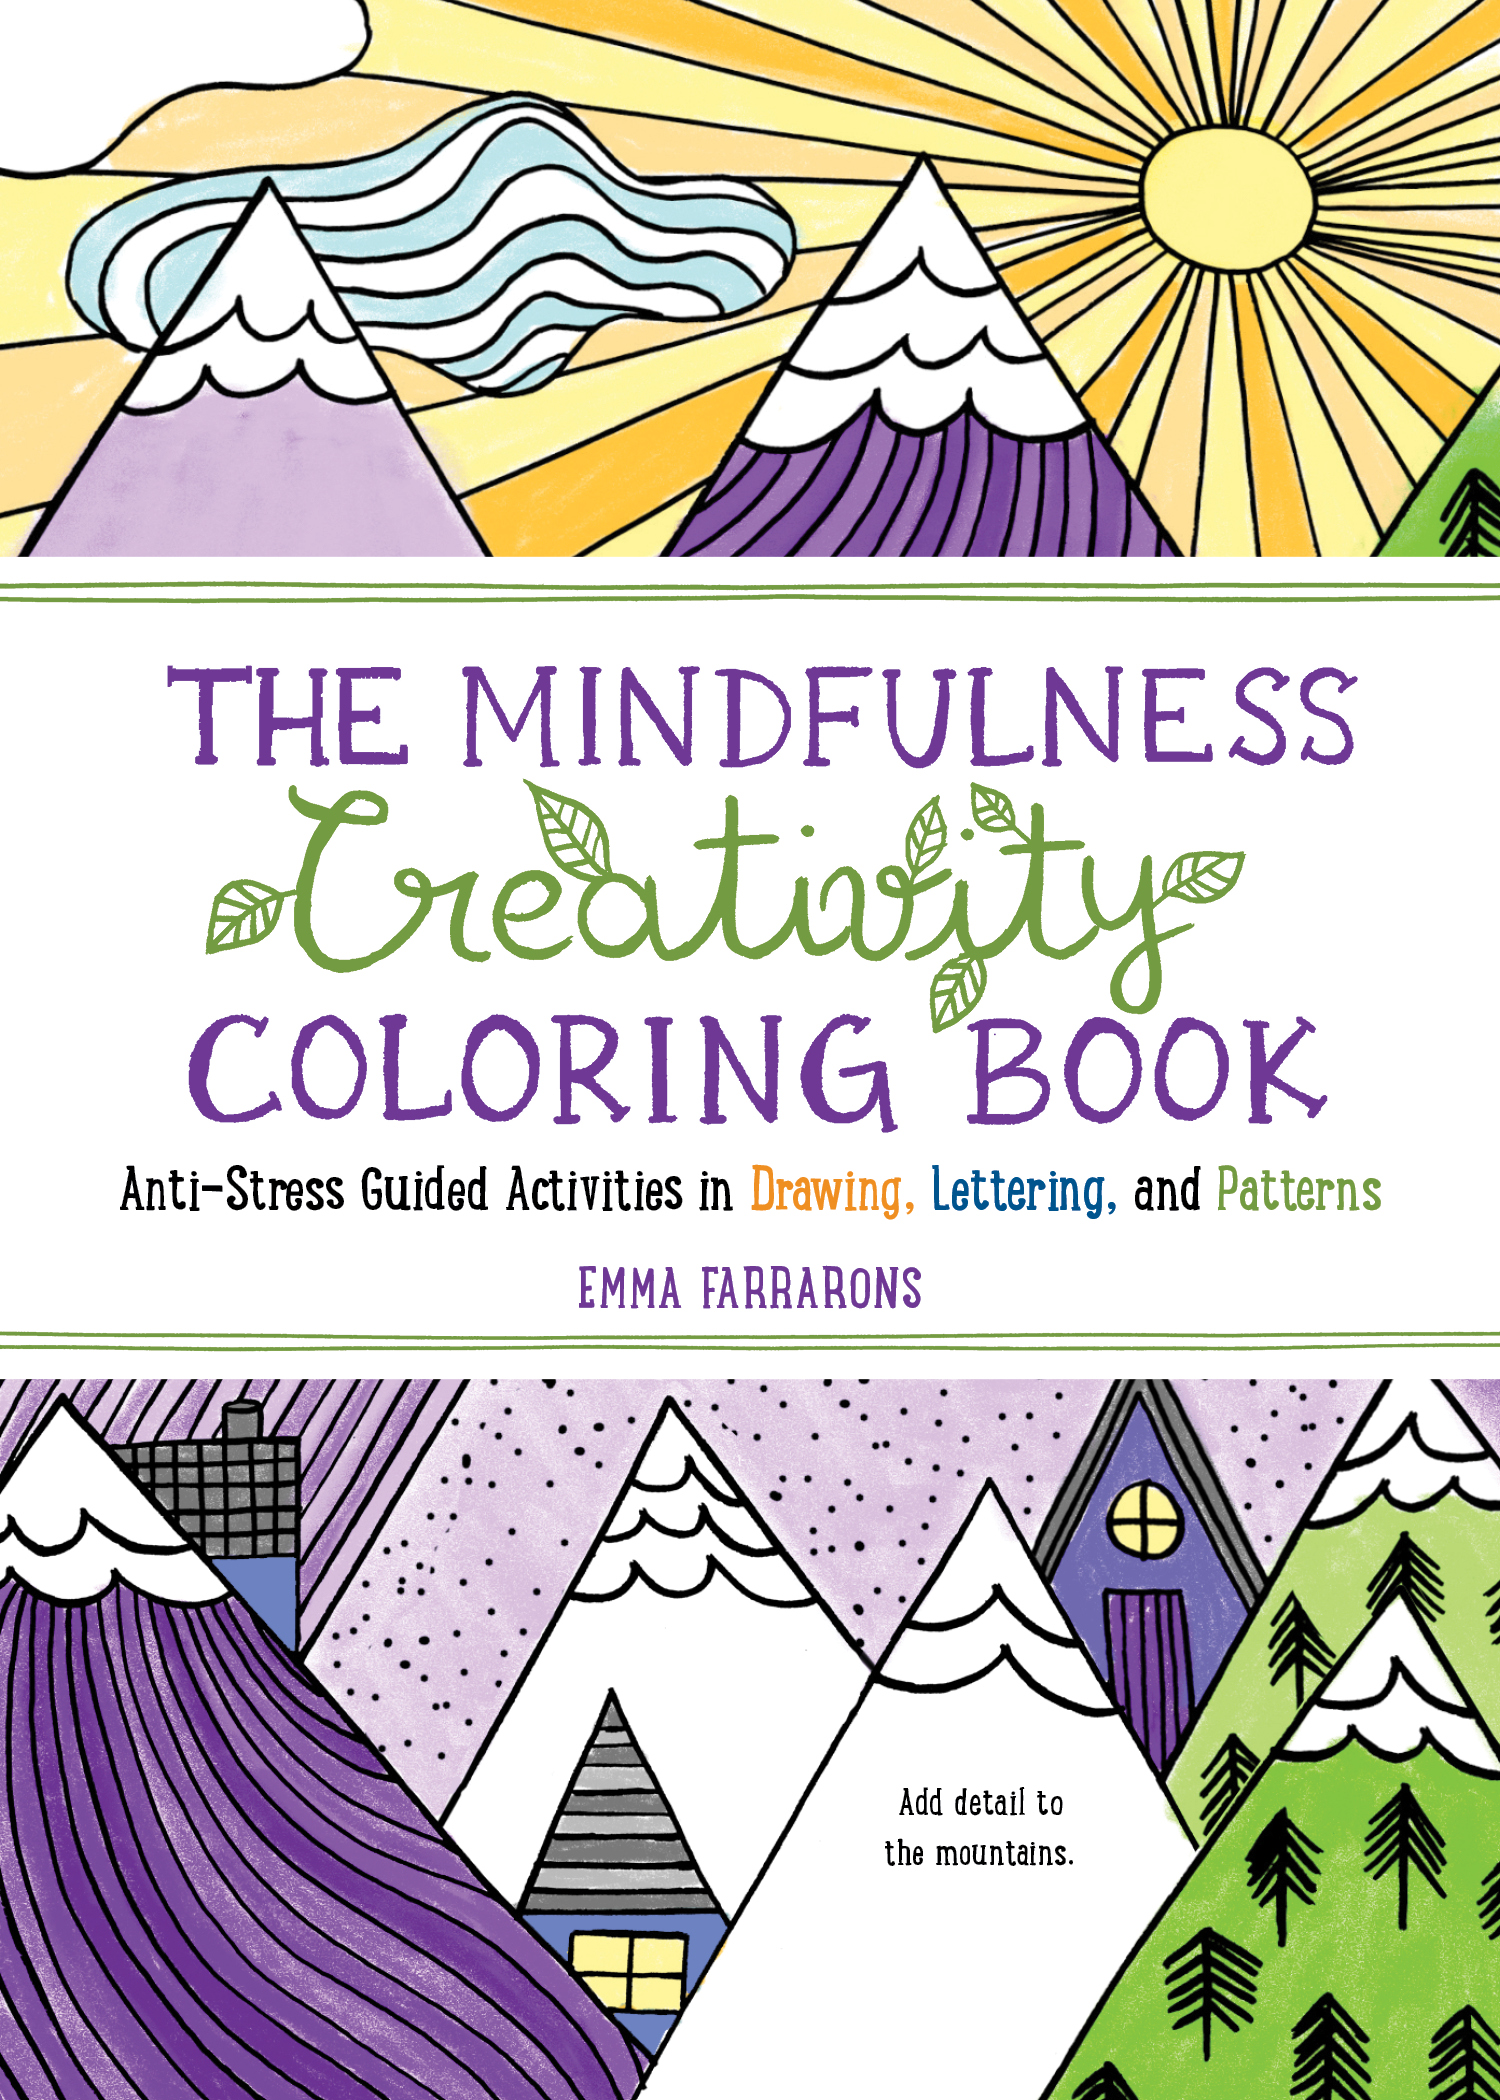 Best adult colouring books to practice mindfulness